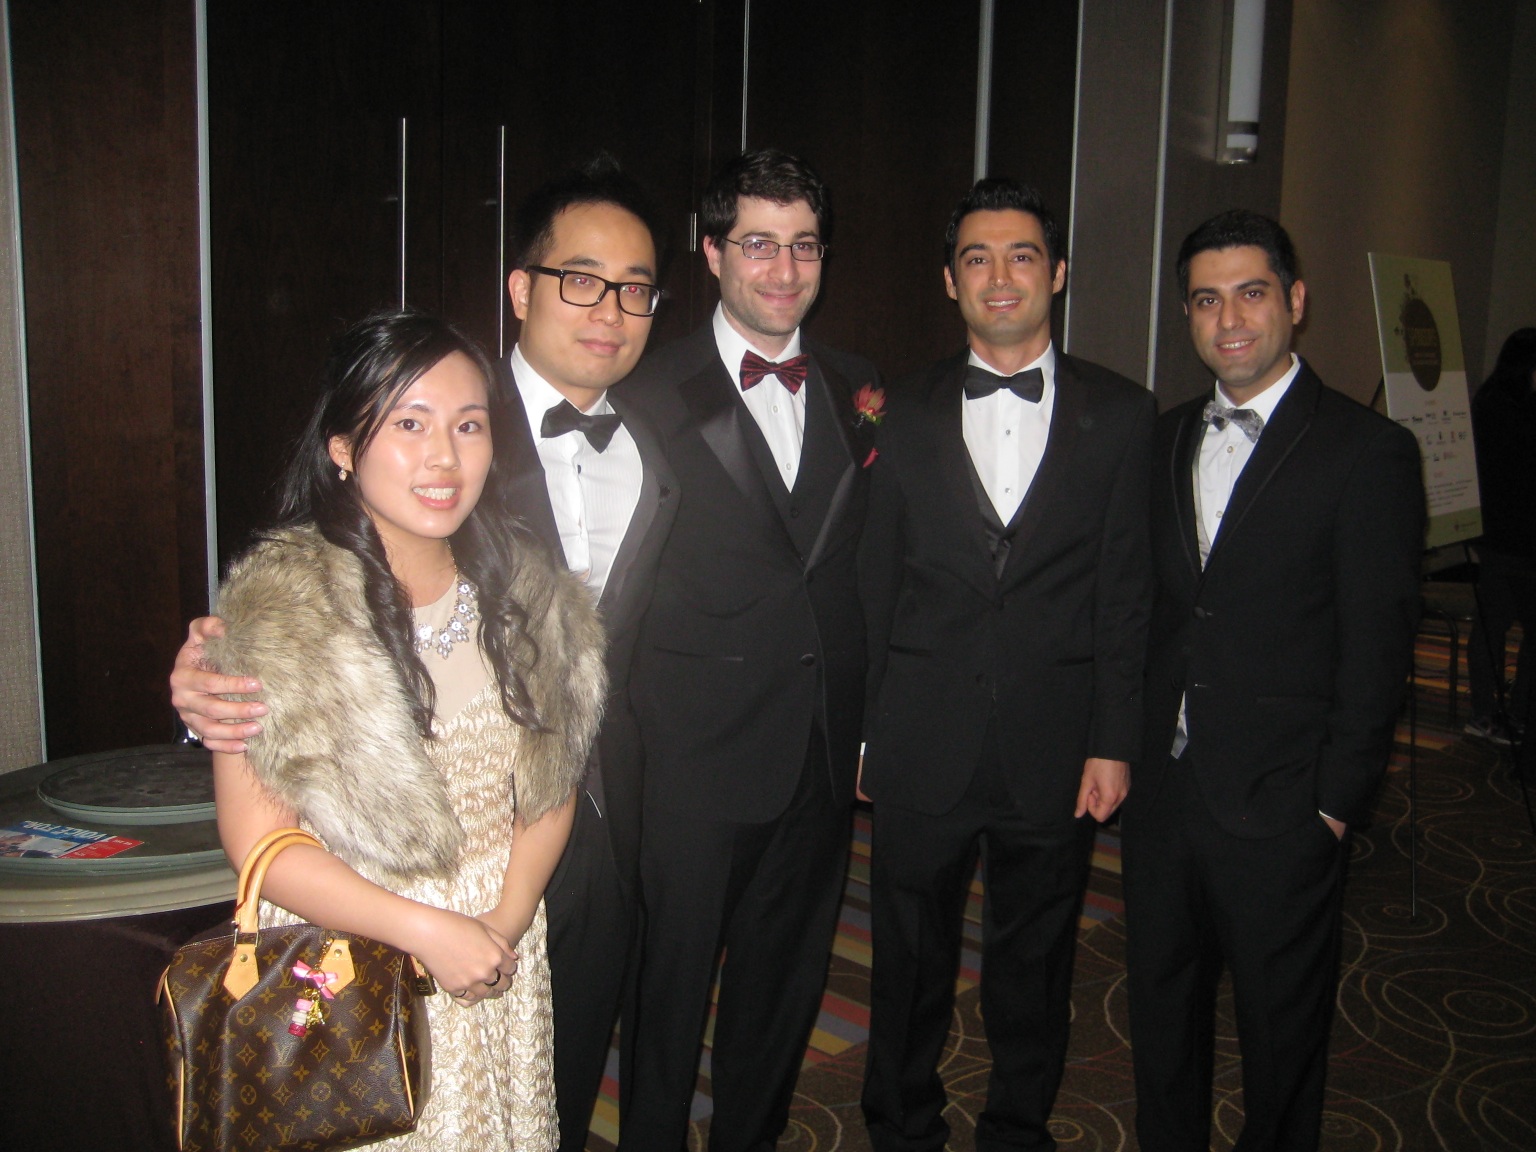 The Dworkin group at the 2015 PEO awards gala, from left to right: Emily Law, Hiep Nguyen, Prof. Seth Dworkin, Ali Khosousi, Meysam Sahafzadeh